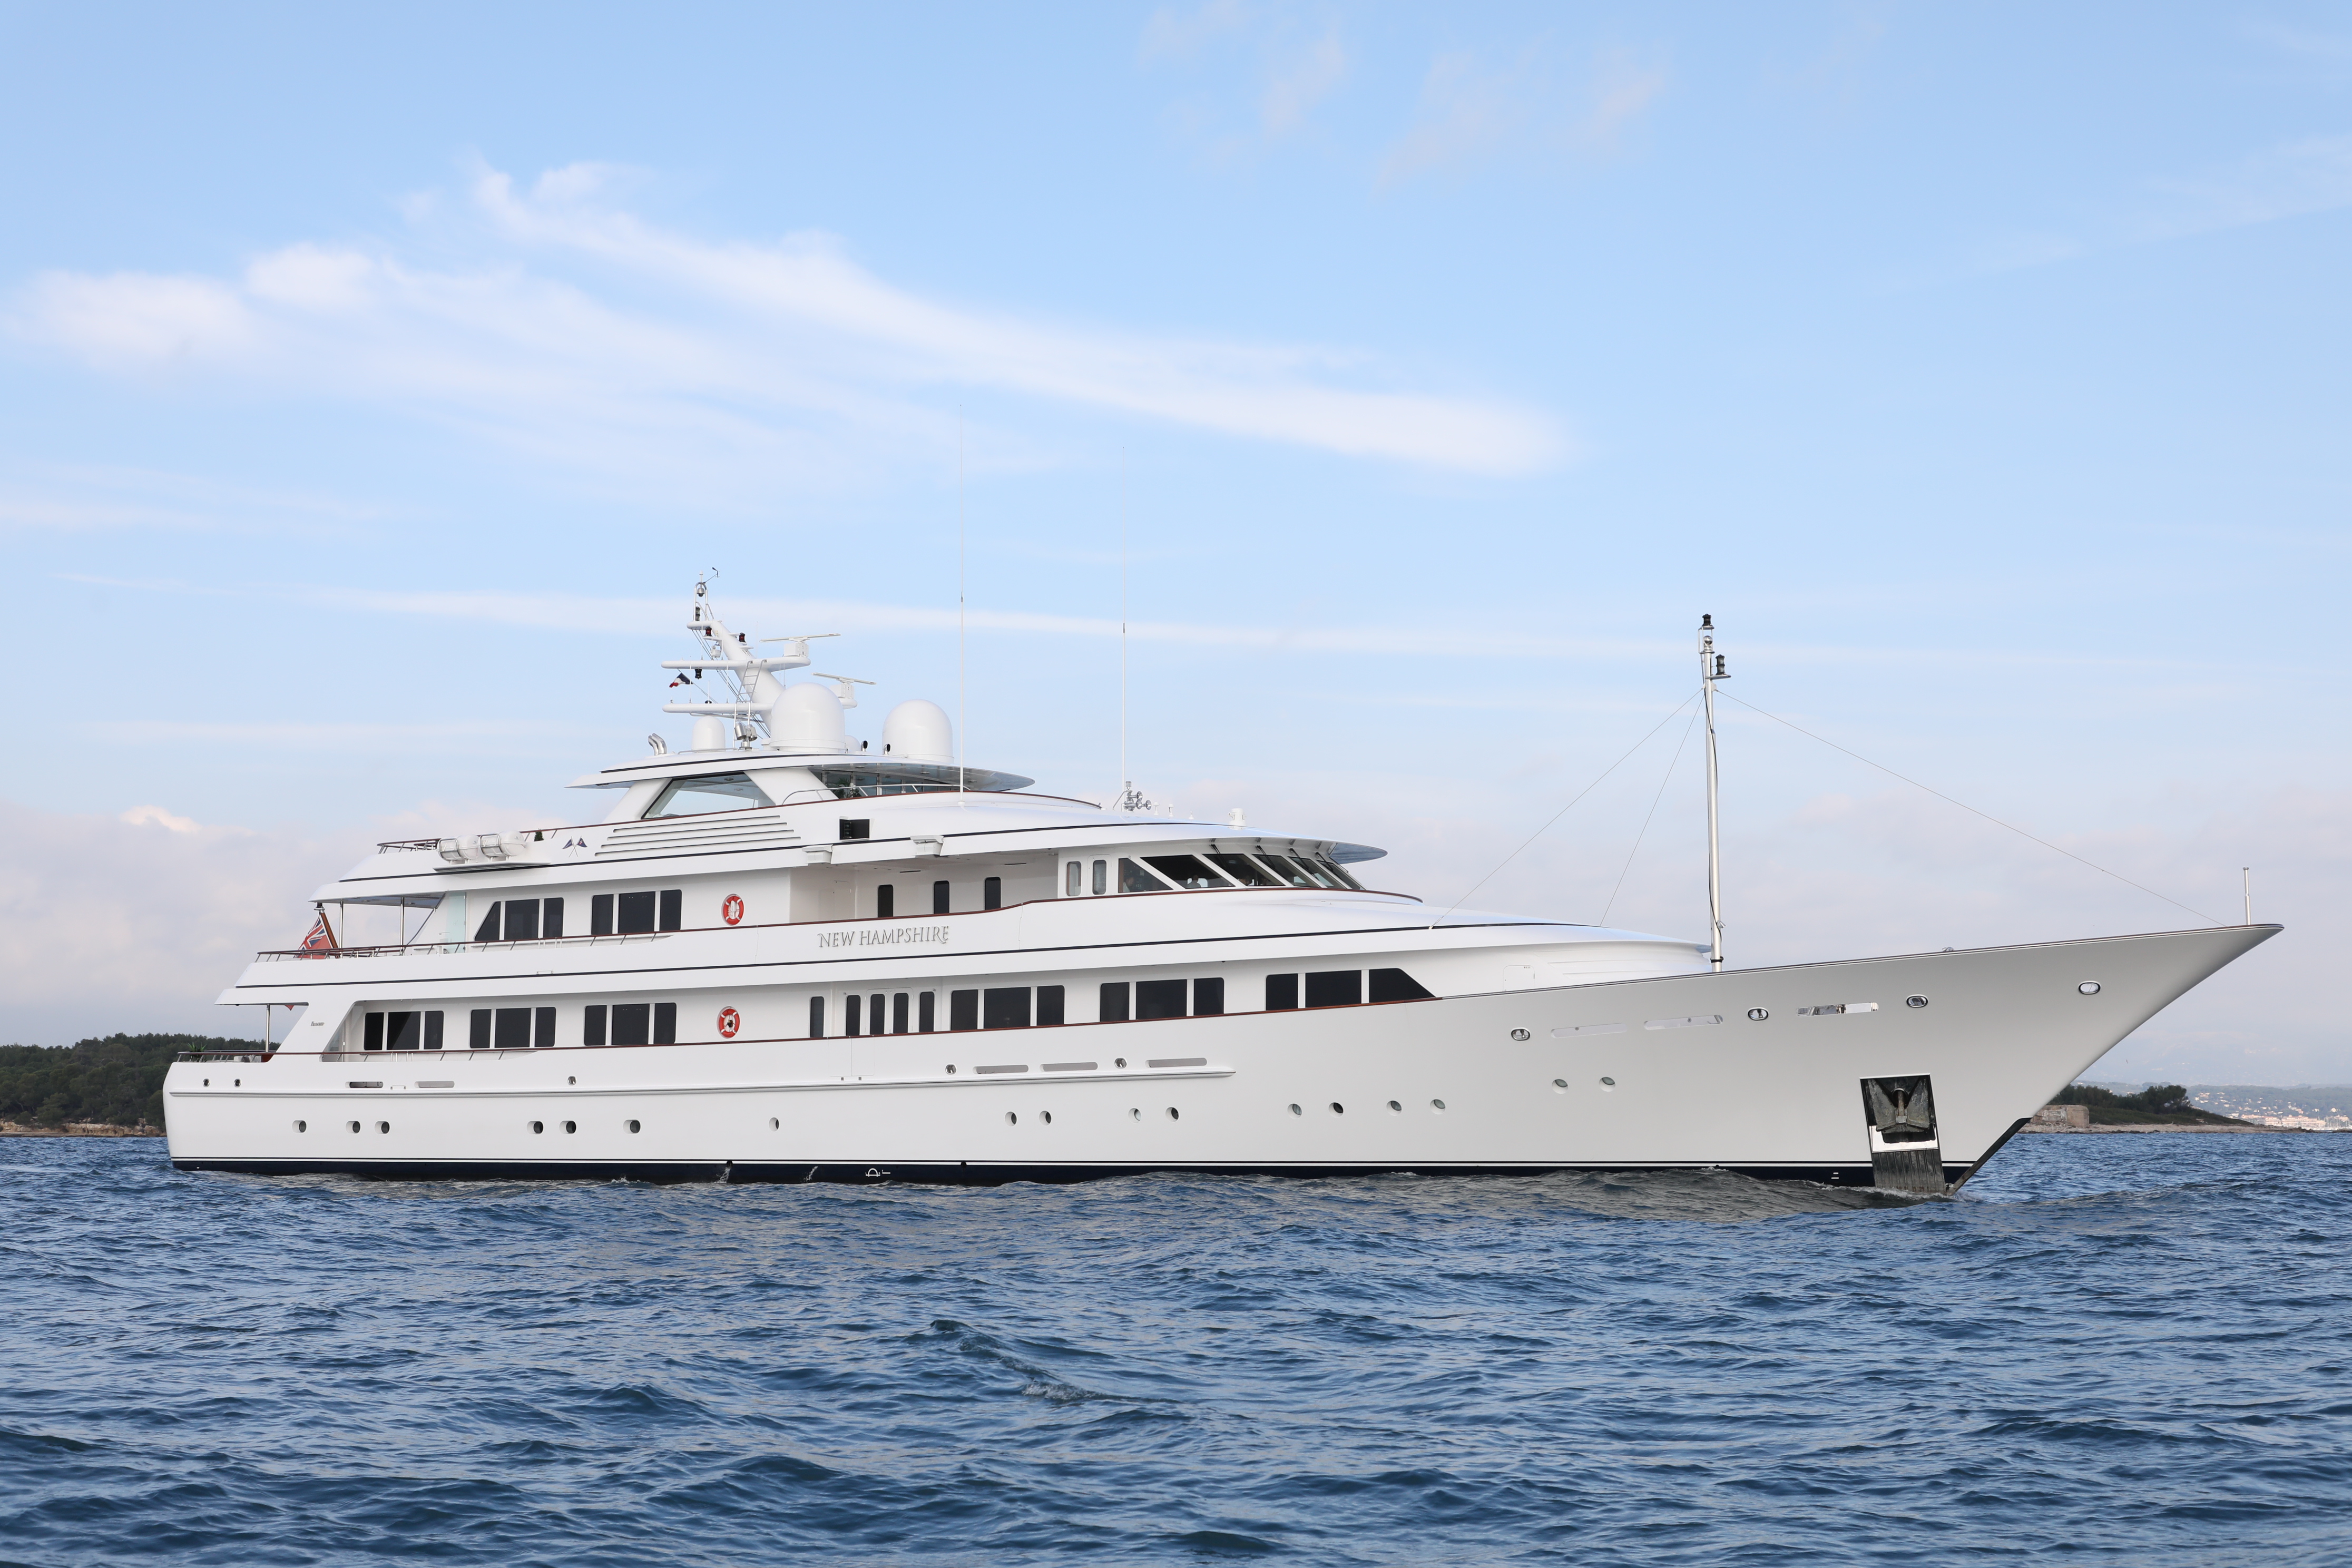 NEW HAMPSHIRE charter specs and number of guests